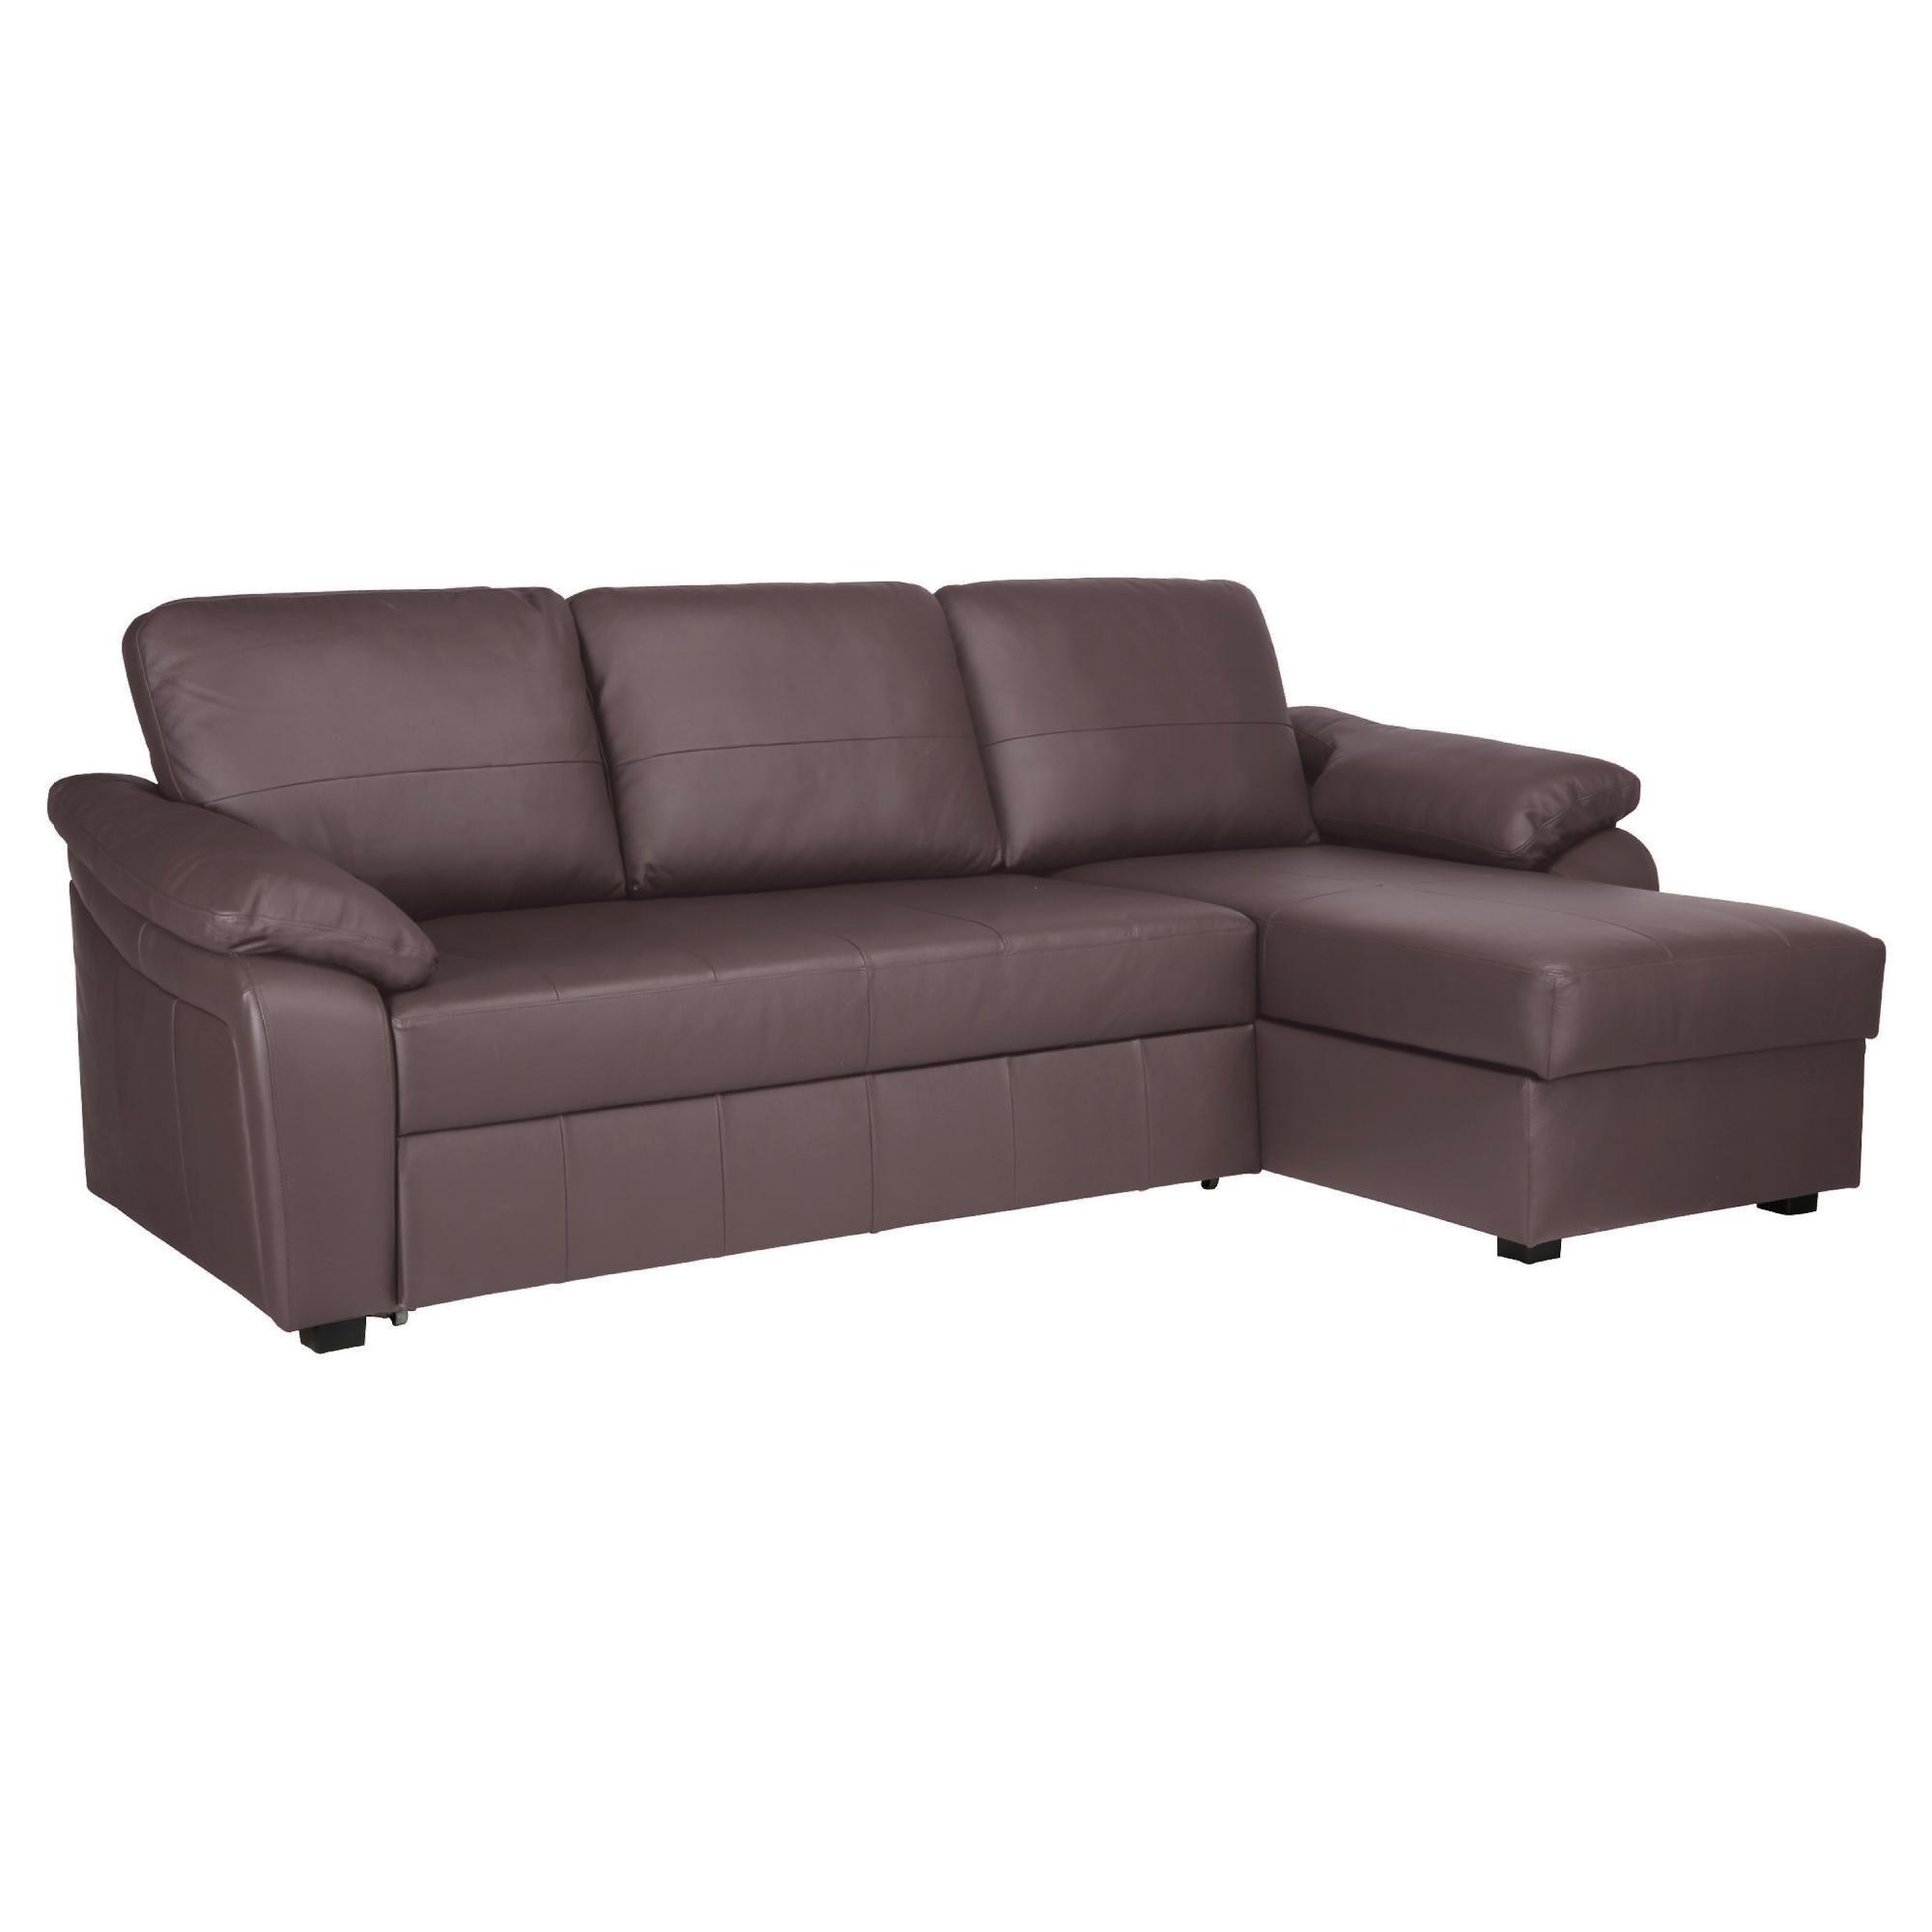 Ashmore Leather Corner Chaise Sofabed Brown Right Hand Facing at Tesco Direct